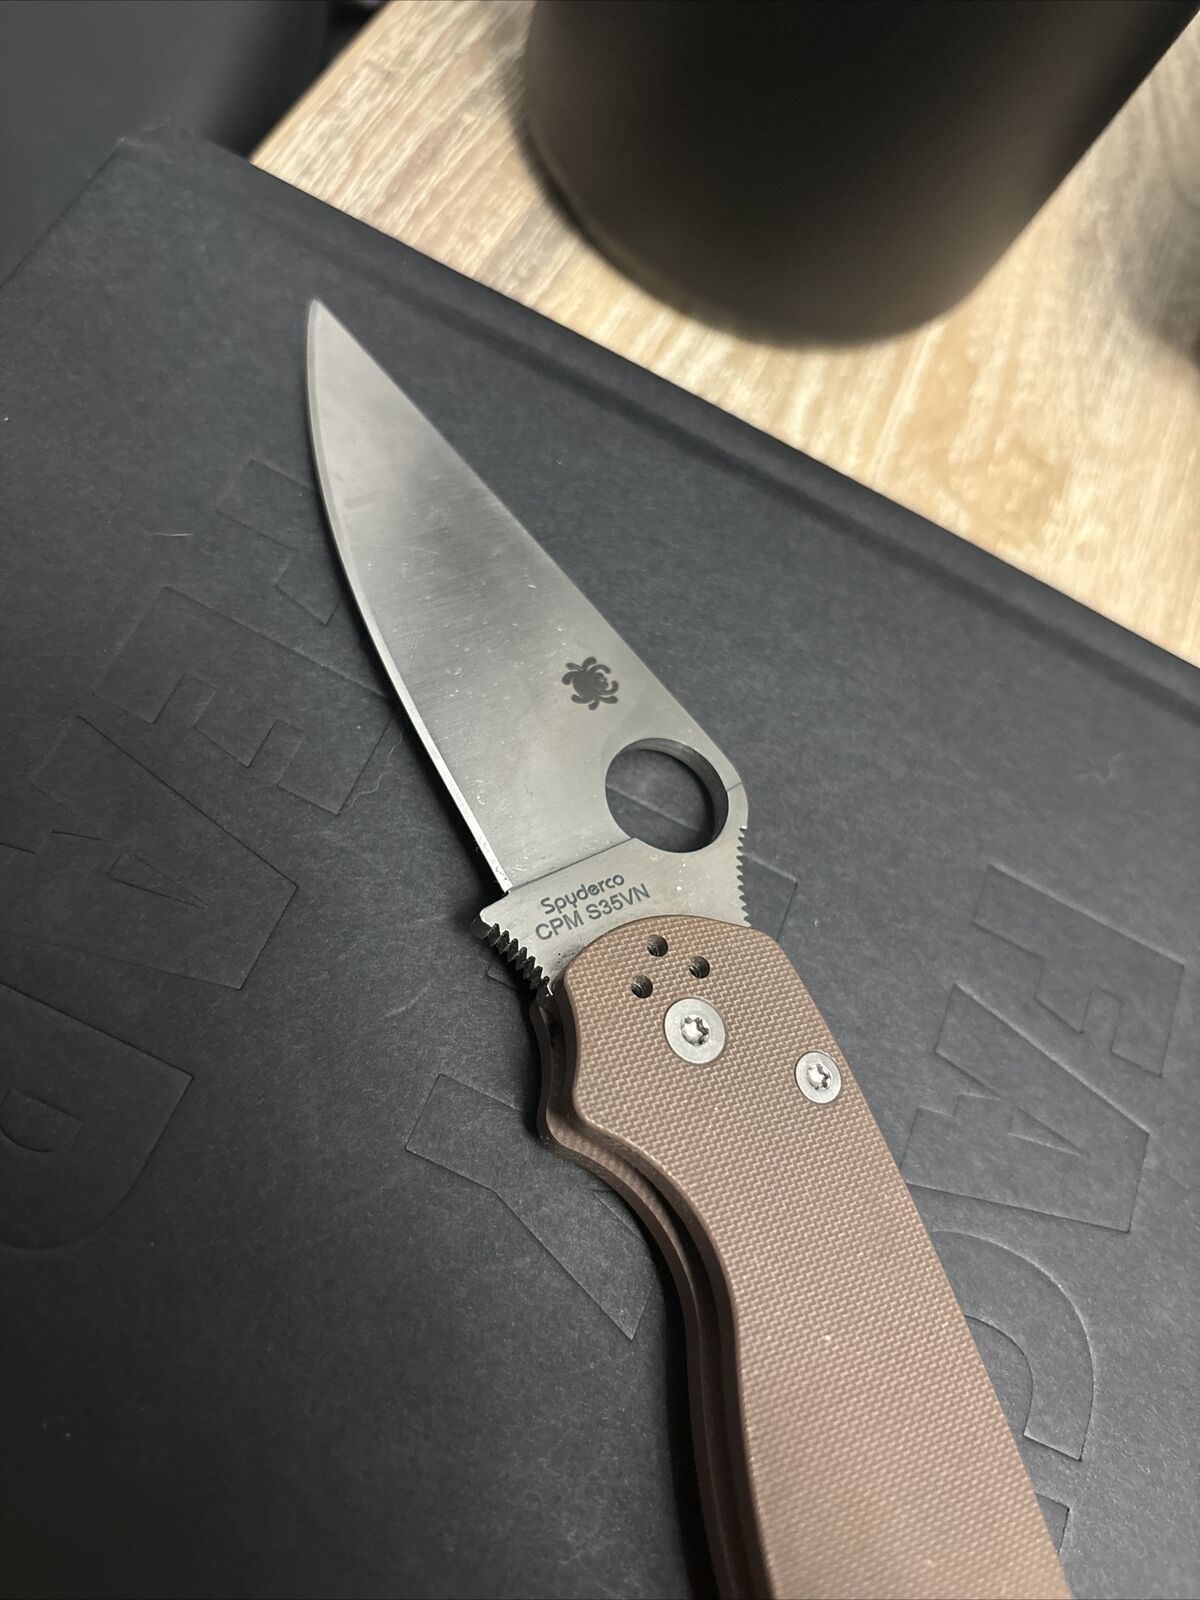 Spyderco Paramilitary 2 PM2 S35VN with Coyote Brown G10 (Sprint Run)